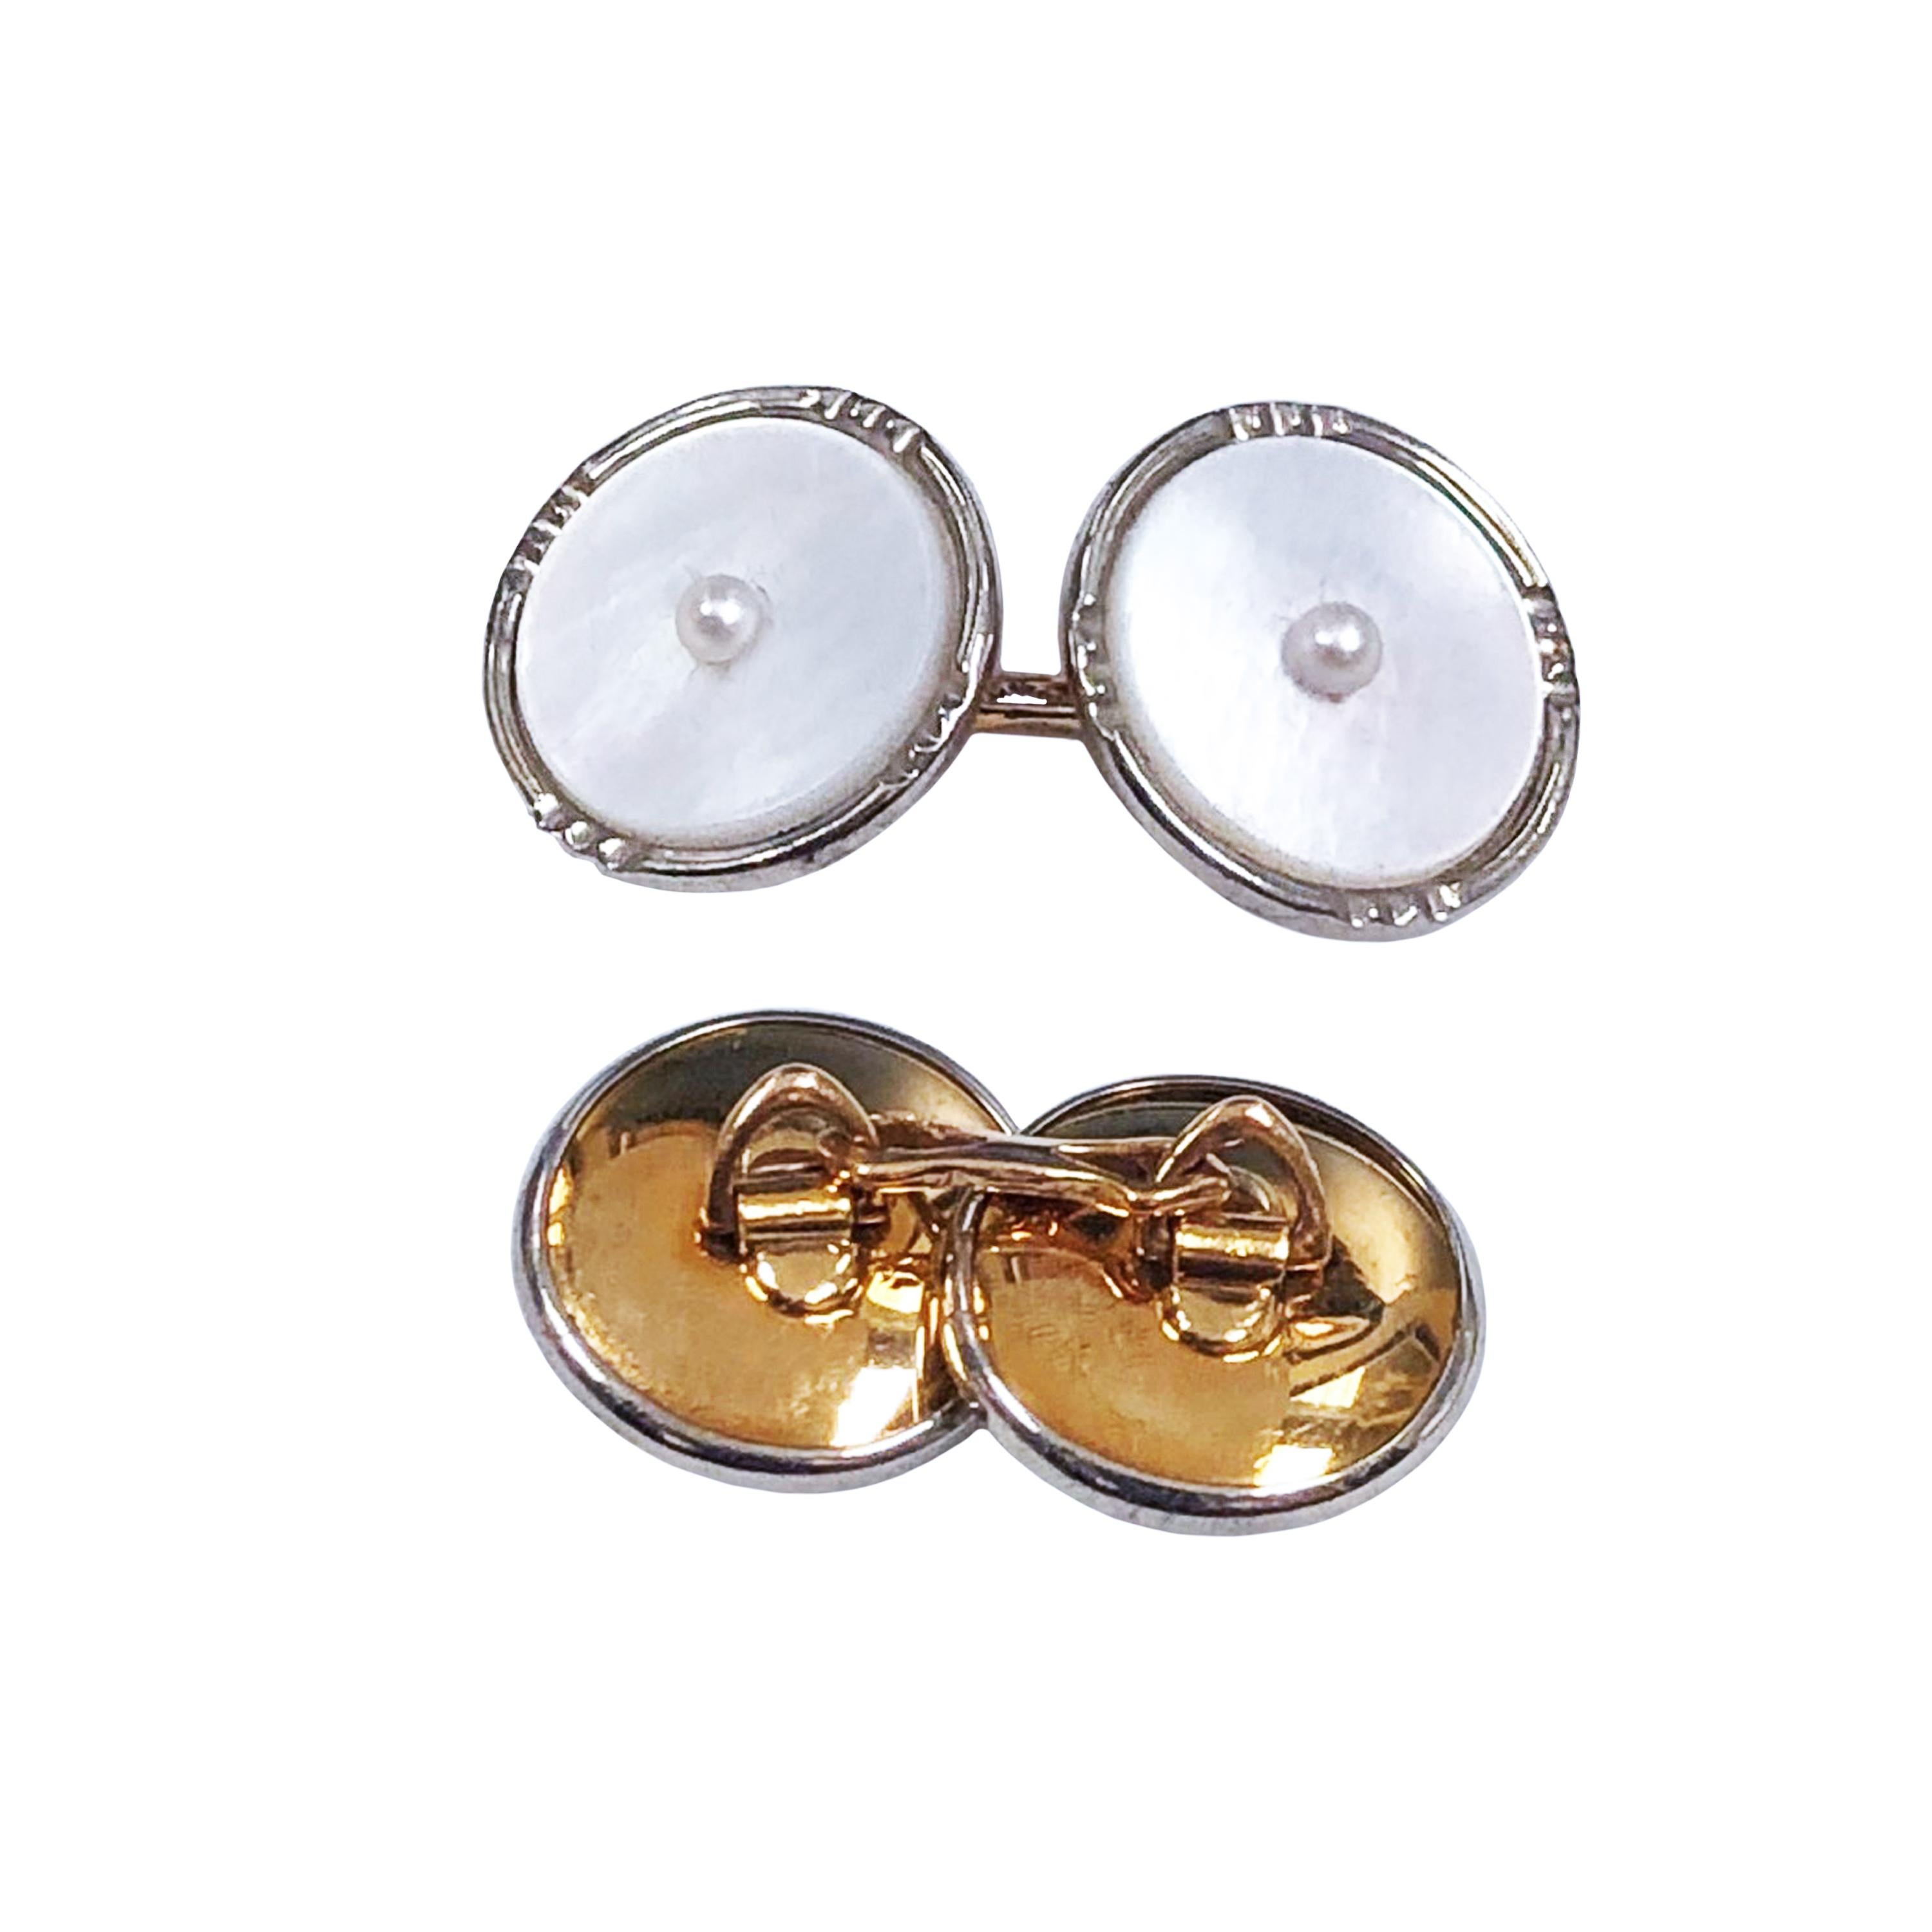 Circa 1920s 10K White and Yellow Gold Tuxedo Shirt Stud Dress Set, this set comprising of Cufflinks, Shirt Studs and Vest Suds is finished with White Mother of Pearl and each piece is centrally set with s Pearl. The set comes in the original fitted